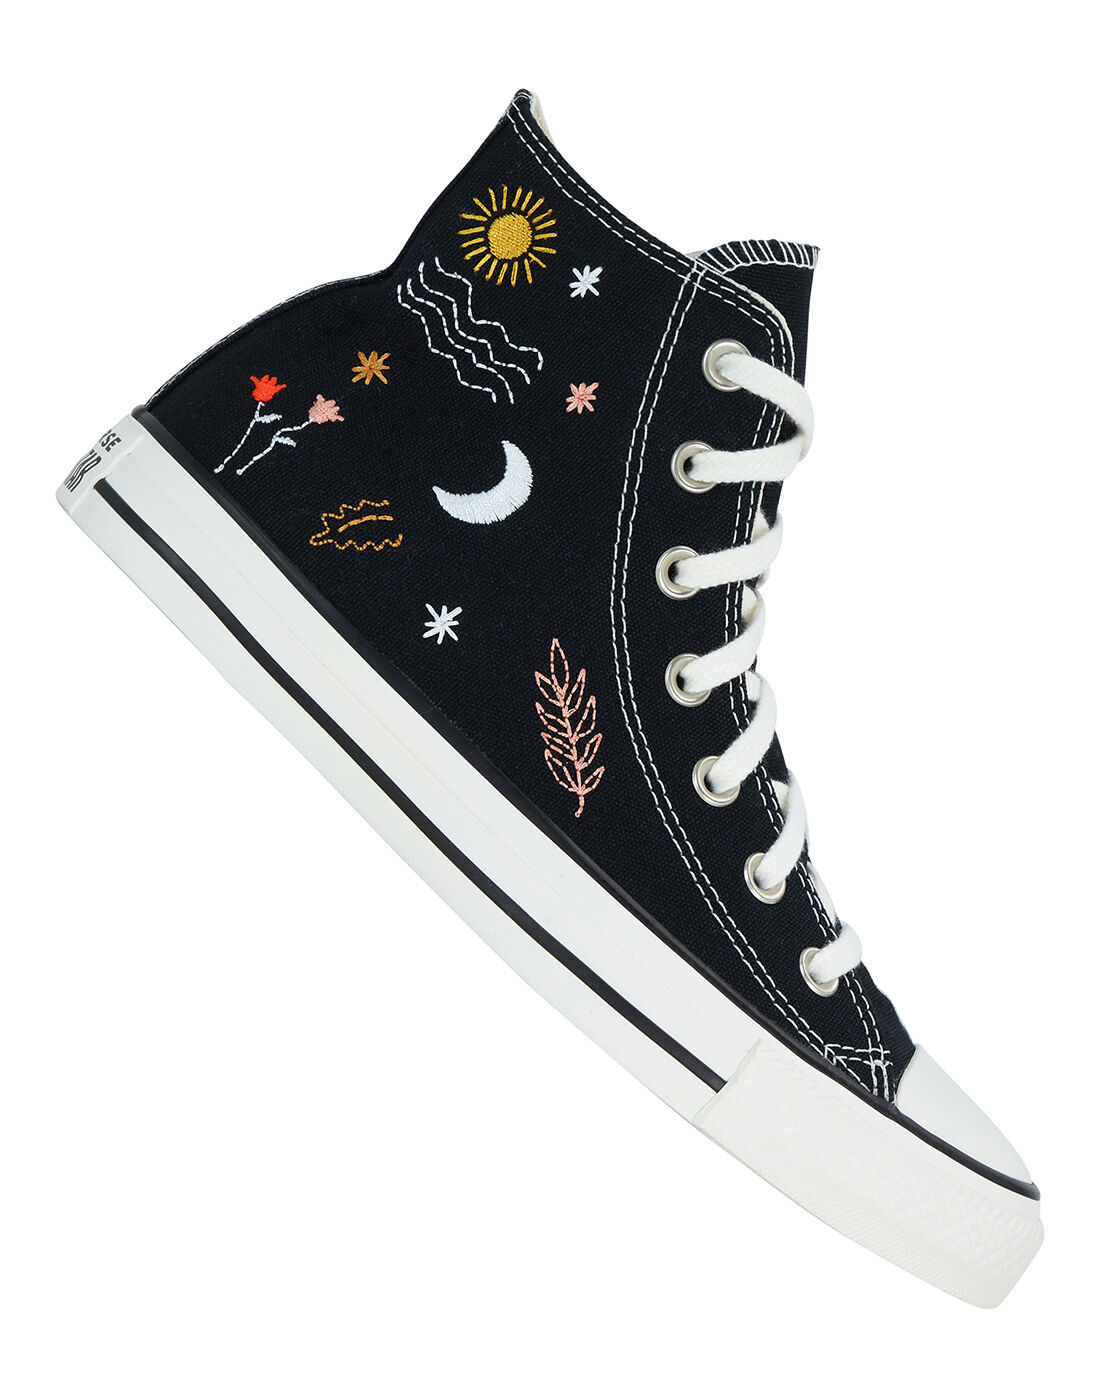 converse shoes black friday